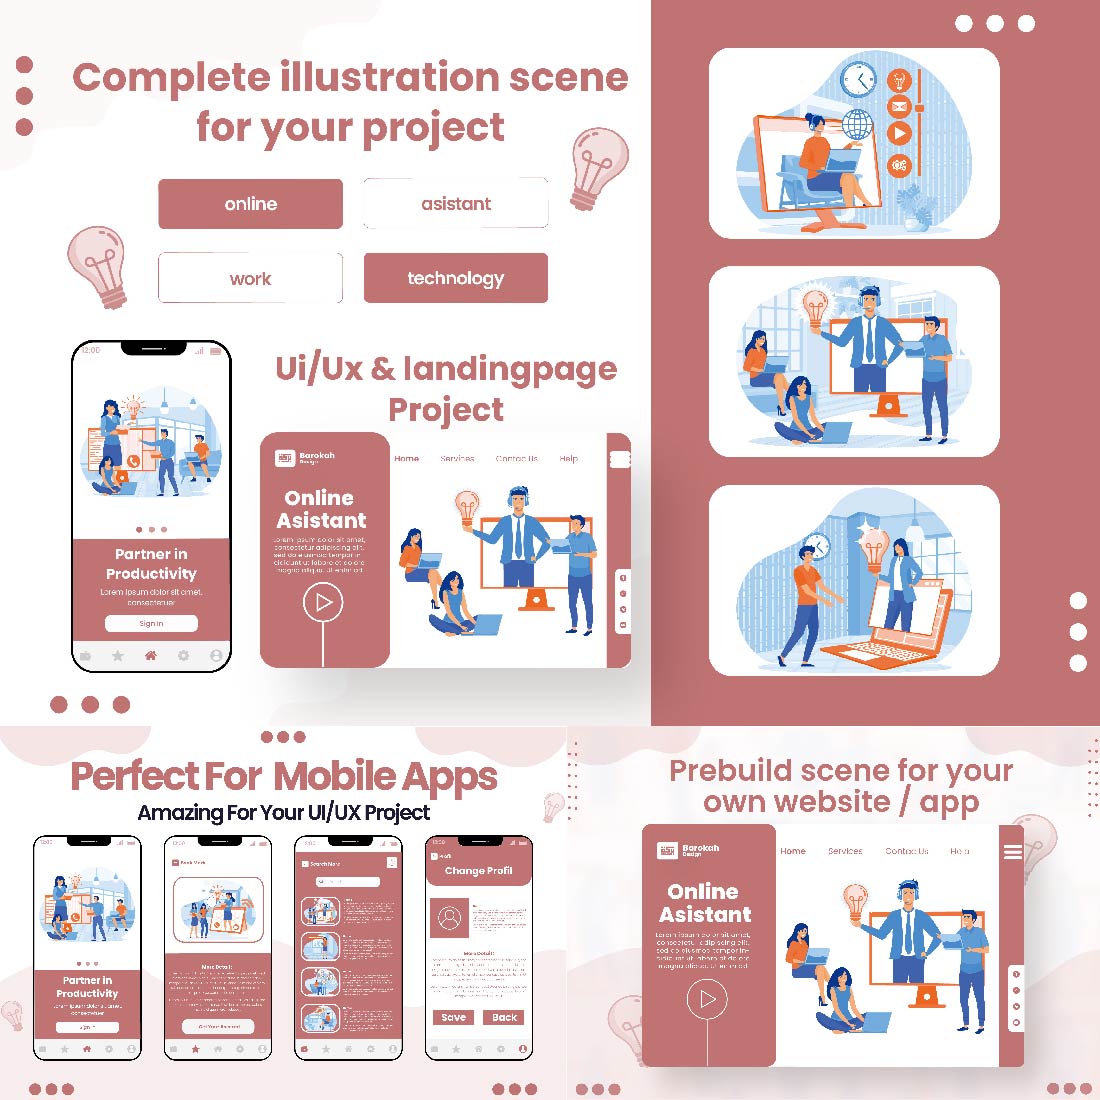 12 Illustrations Related to Online Assistant 2 preview image.